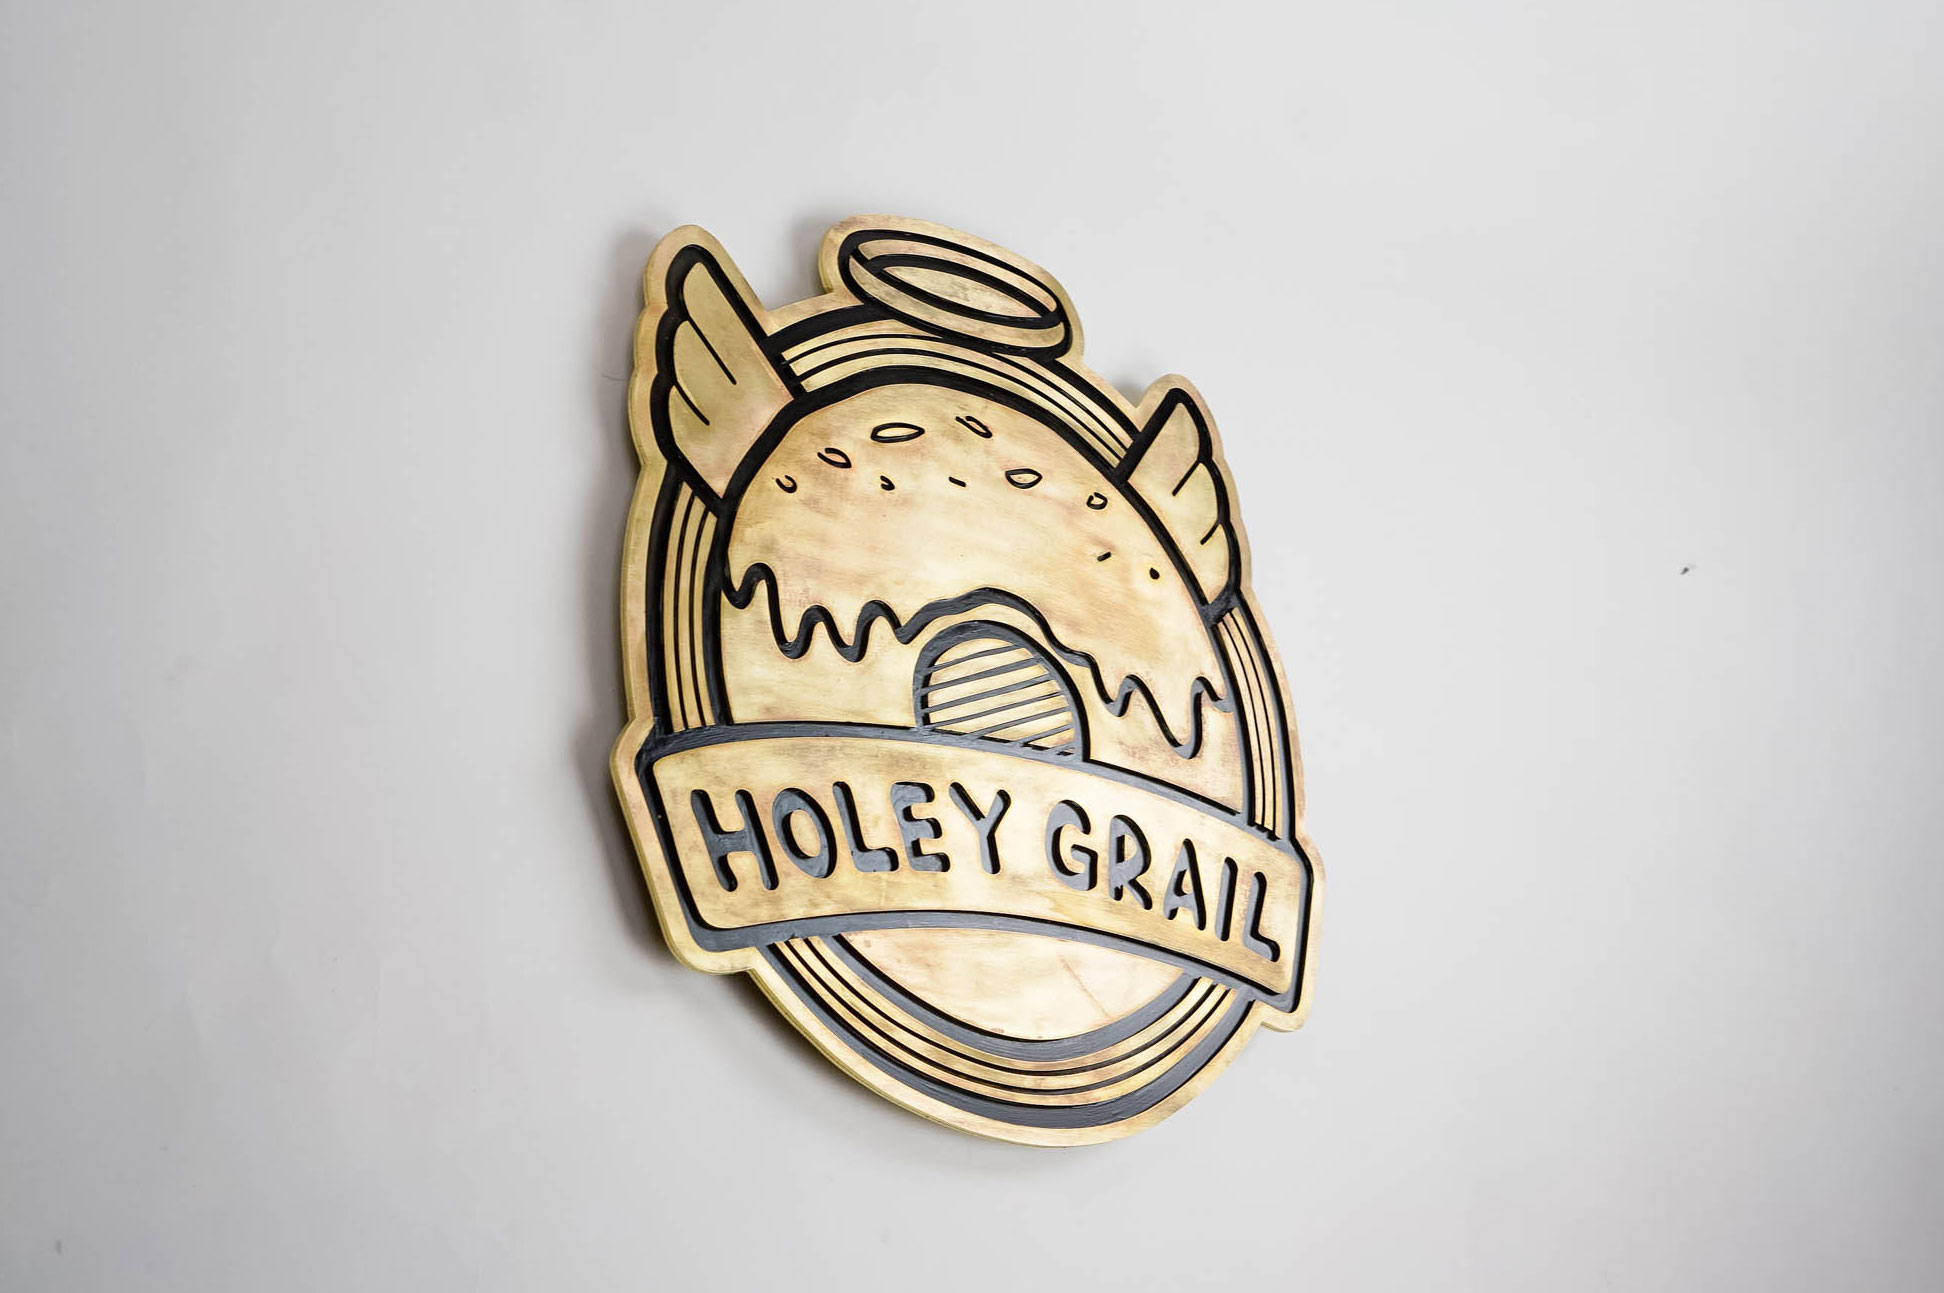 Patinated, retro brass sign for Holey Grail, a donut shop based in Hawaii.